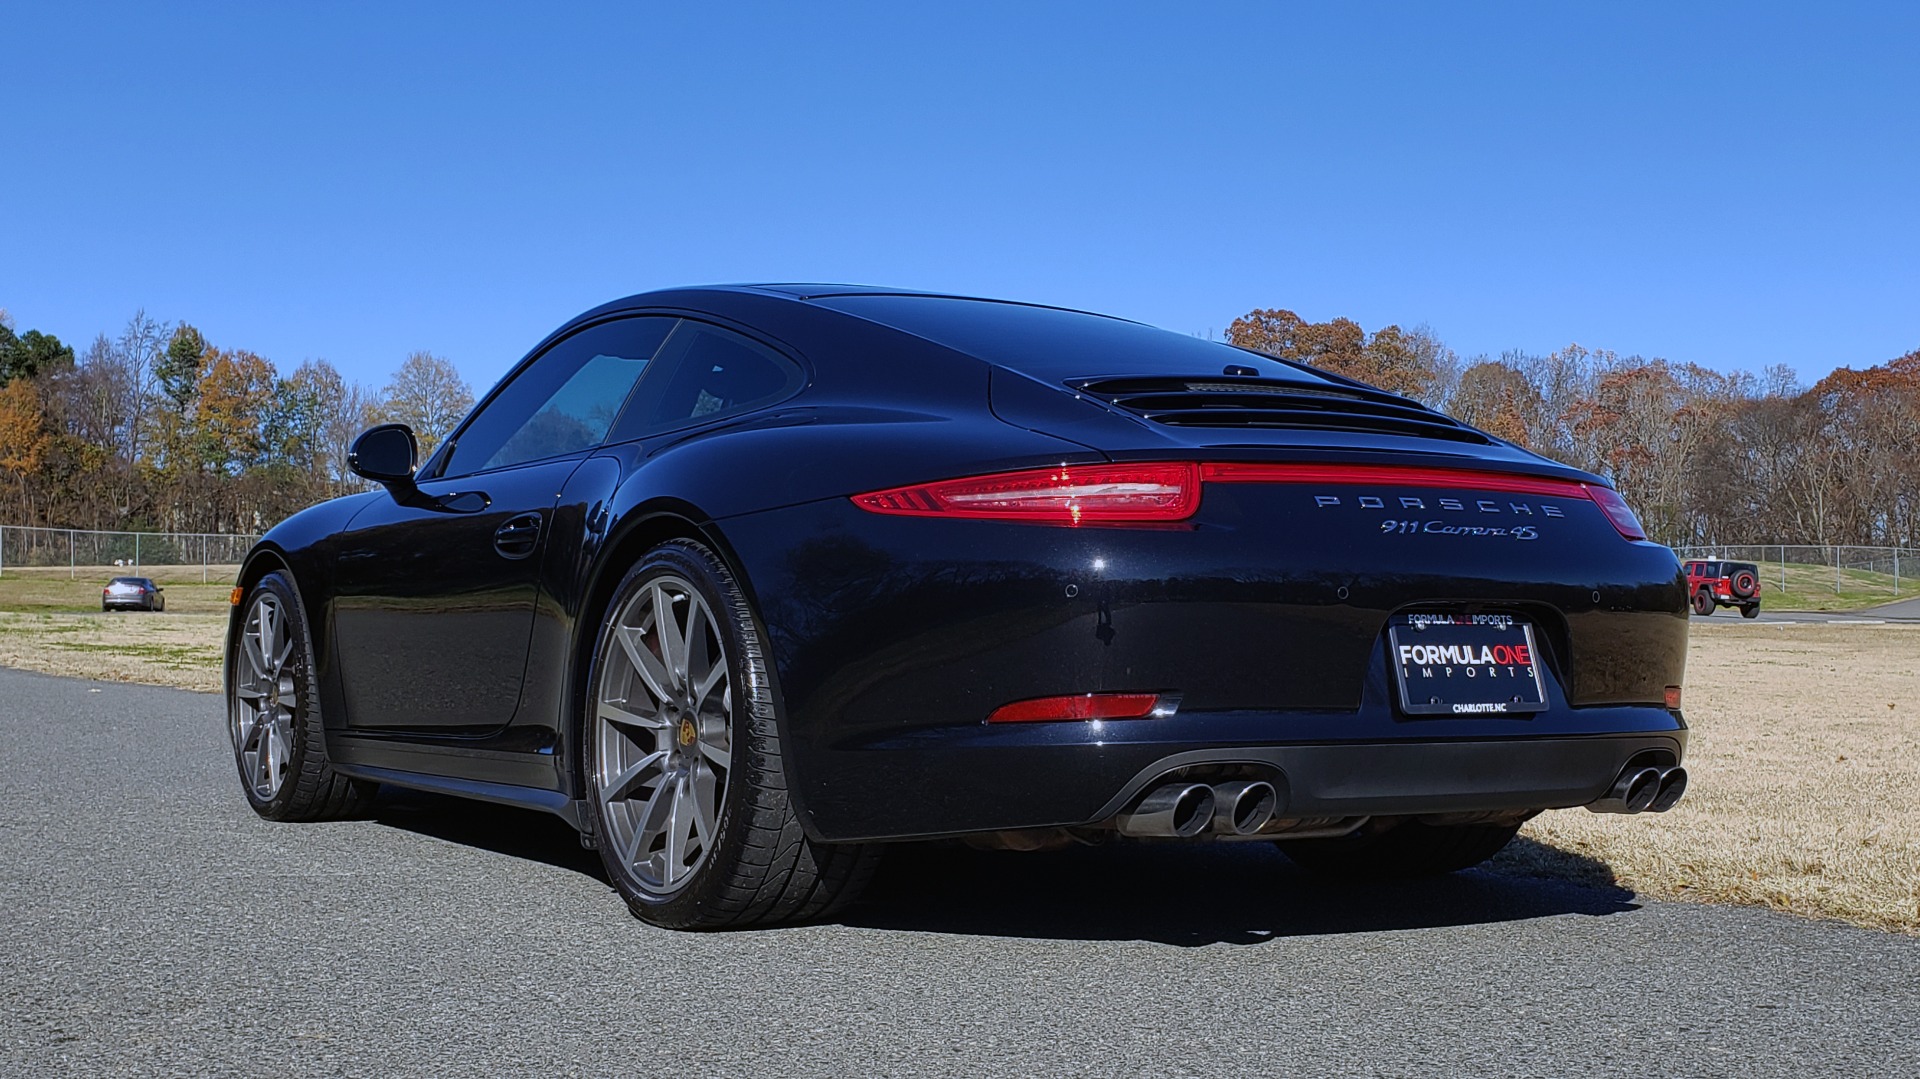 Used 2016 Porsche 911 CARRERA 4S PREM / NAV / CHRONO / BOSE / PDLS / SPORT EXH for sale Sold at Formula Imports in Charlotte NC 28227 9